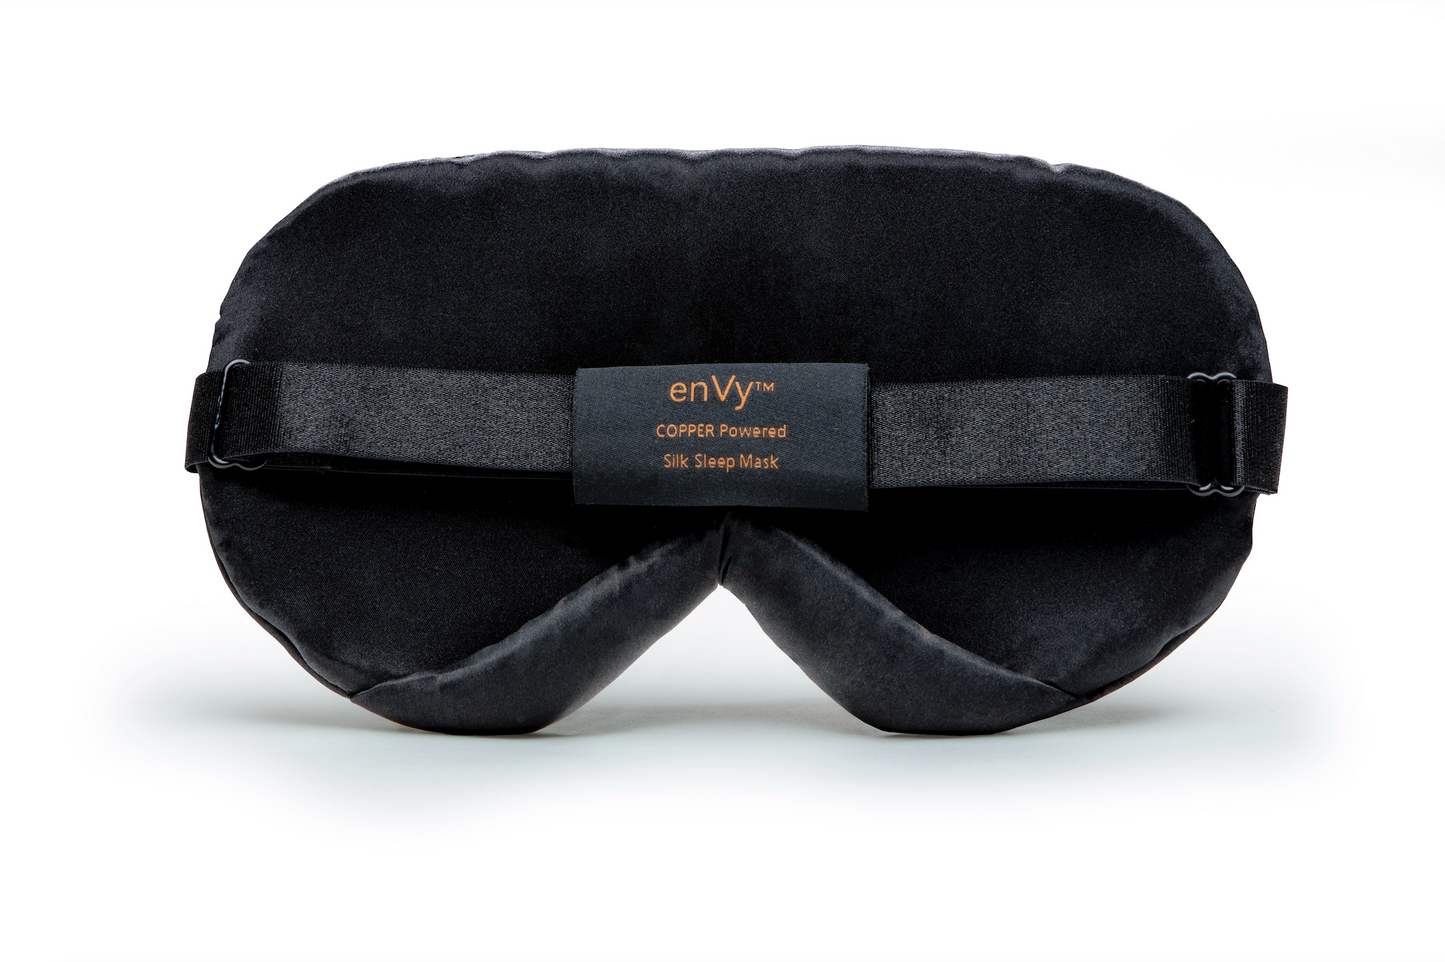 The COPPER-infused Silk Eye Mask by enVy®